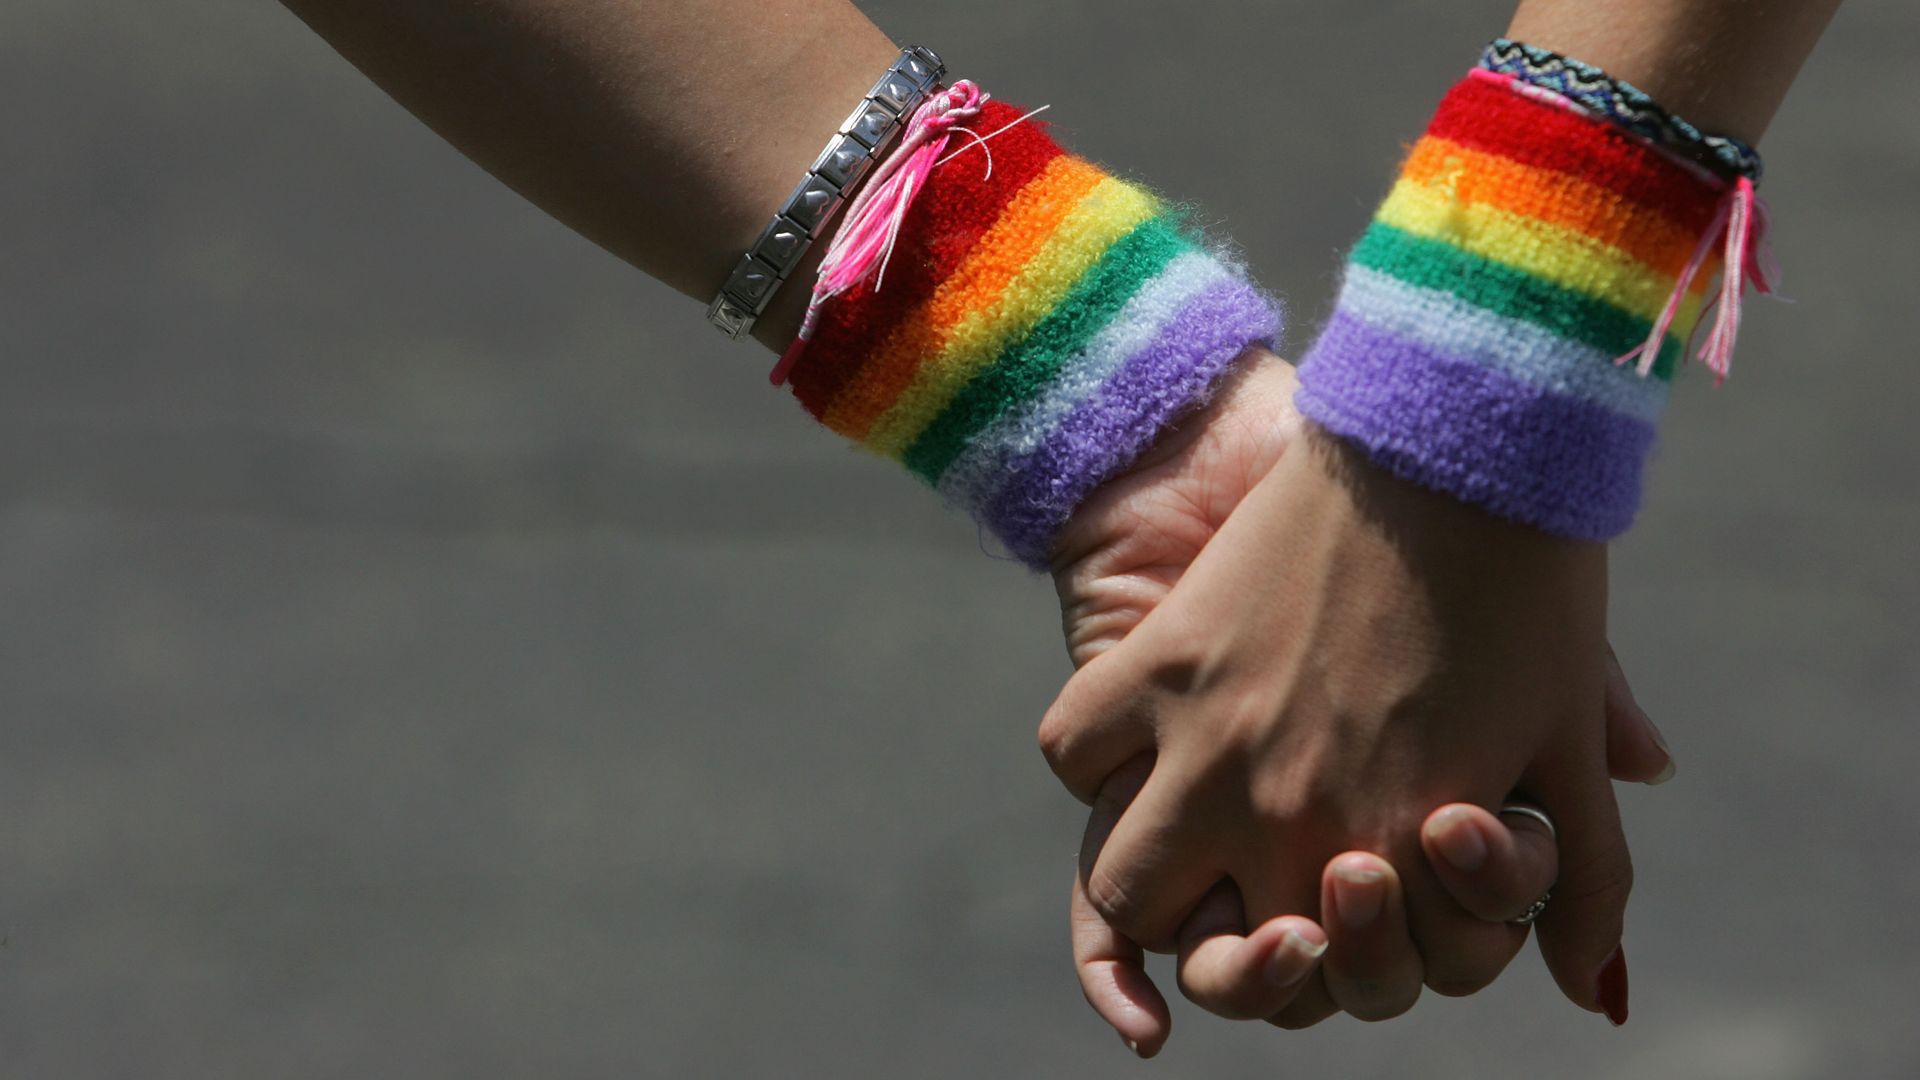 The hands of two women intertwine with pride wristbands on both wrists. 